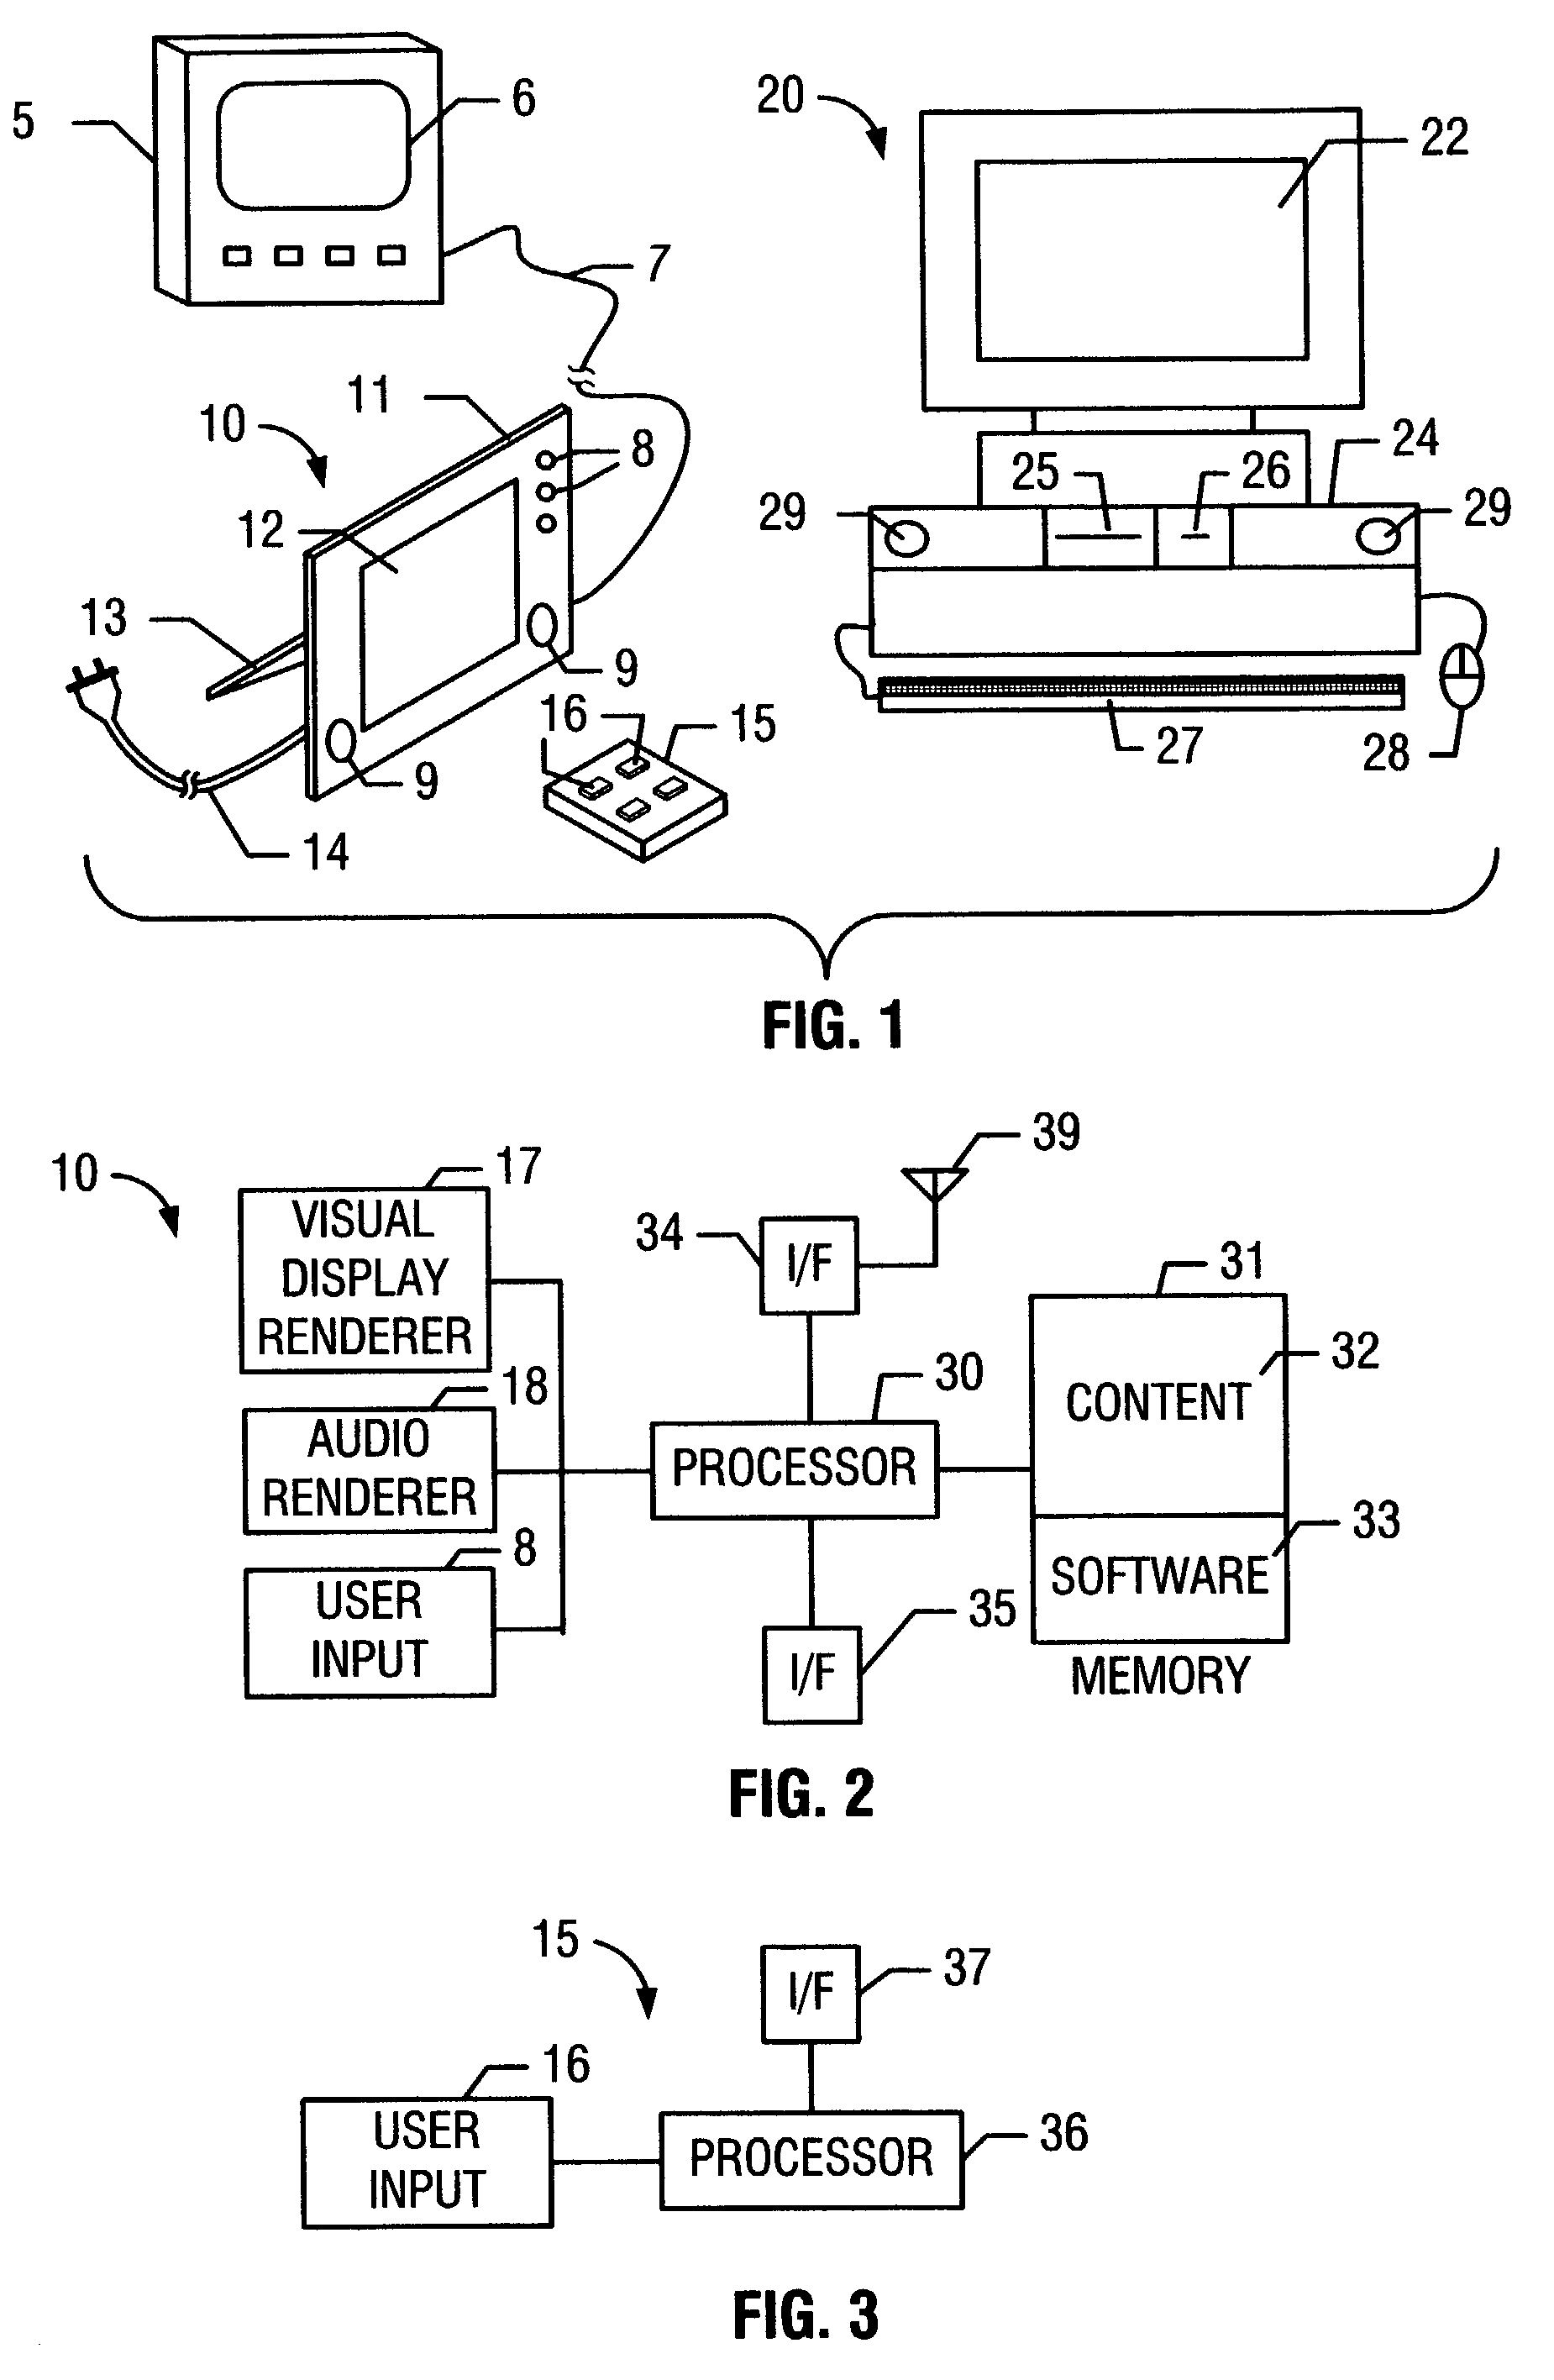 User interface to facilitate exchanging files among processor-based devices